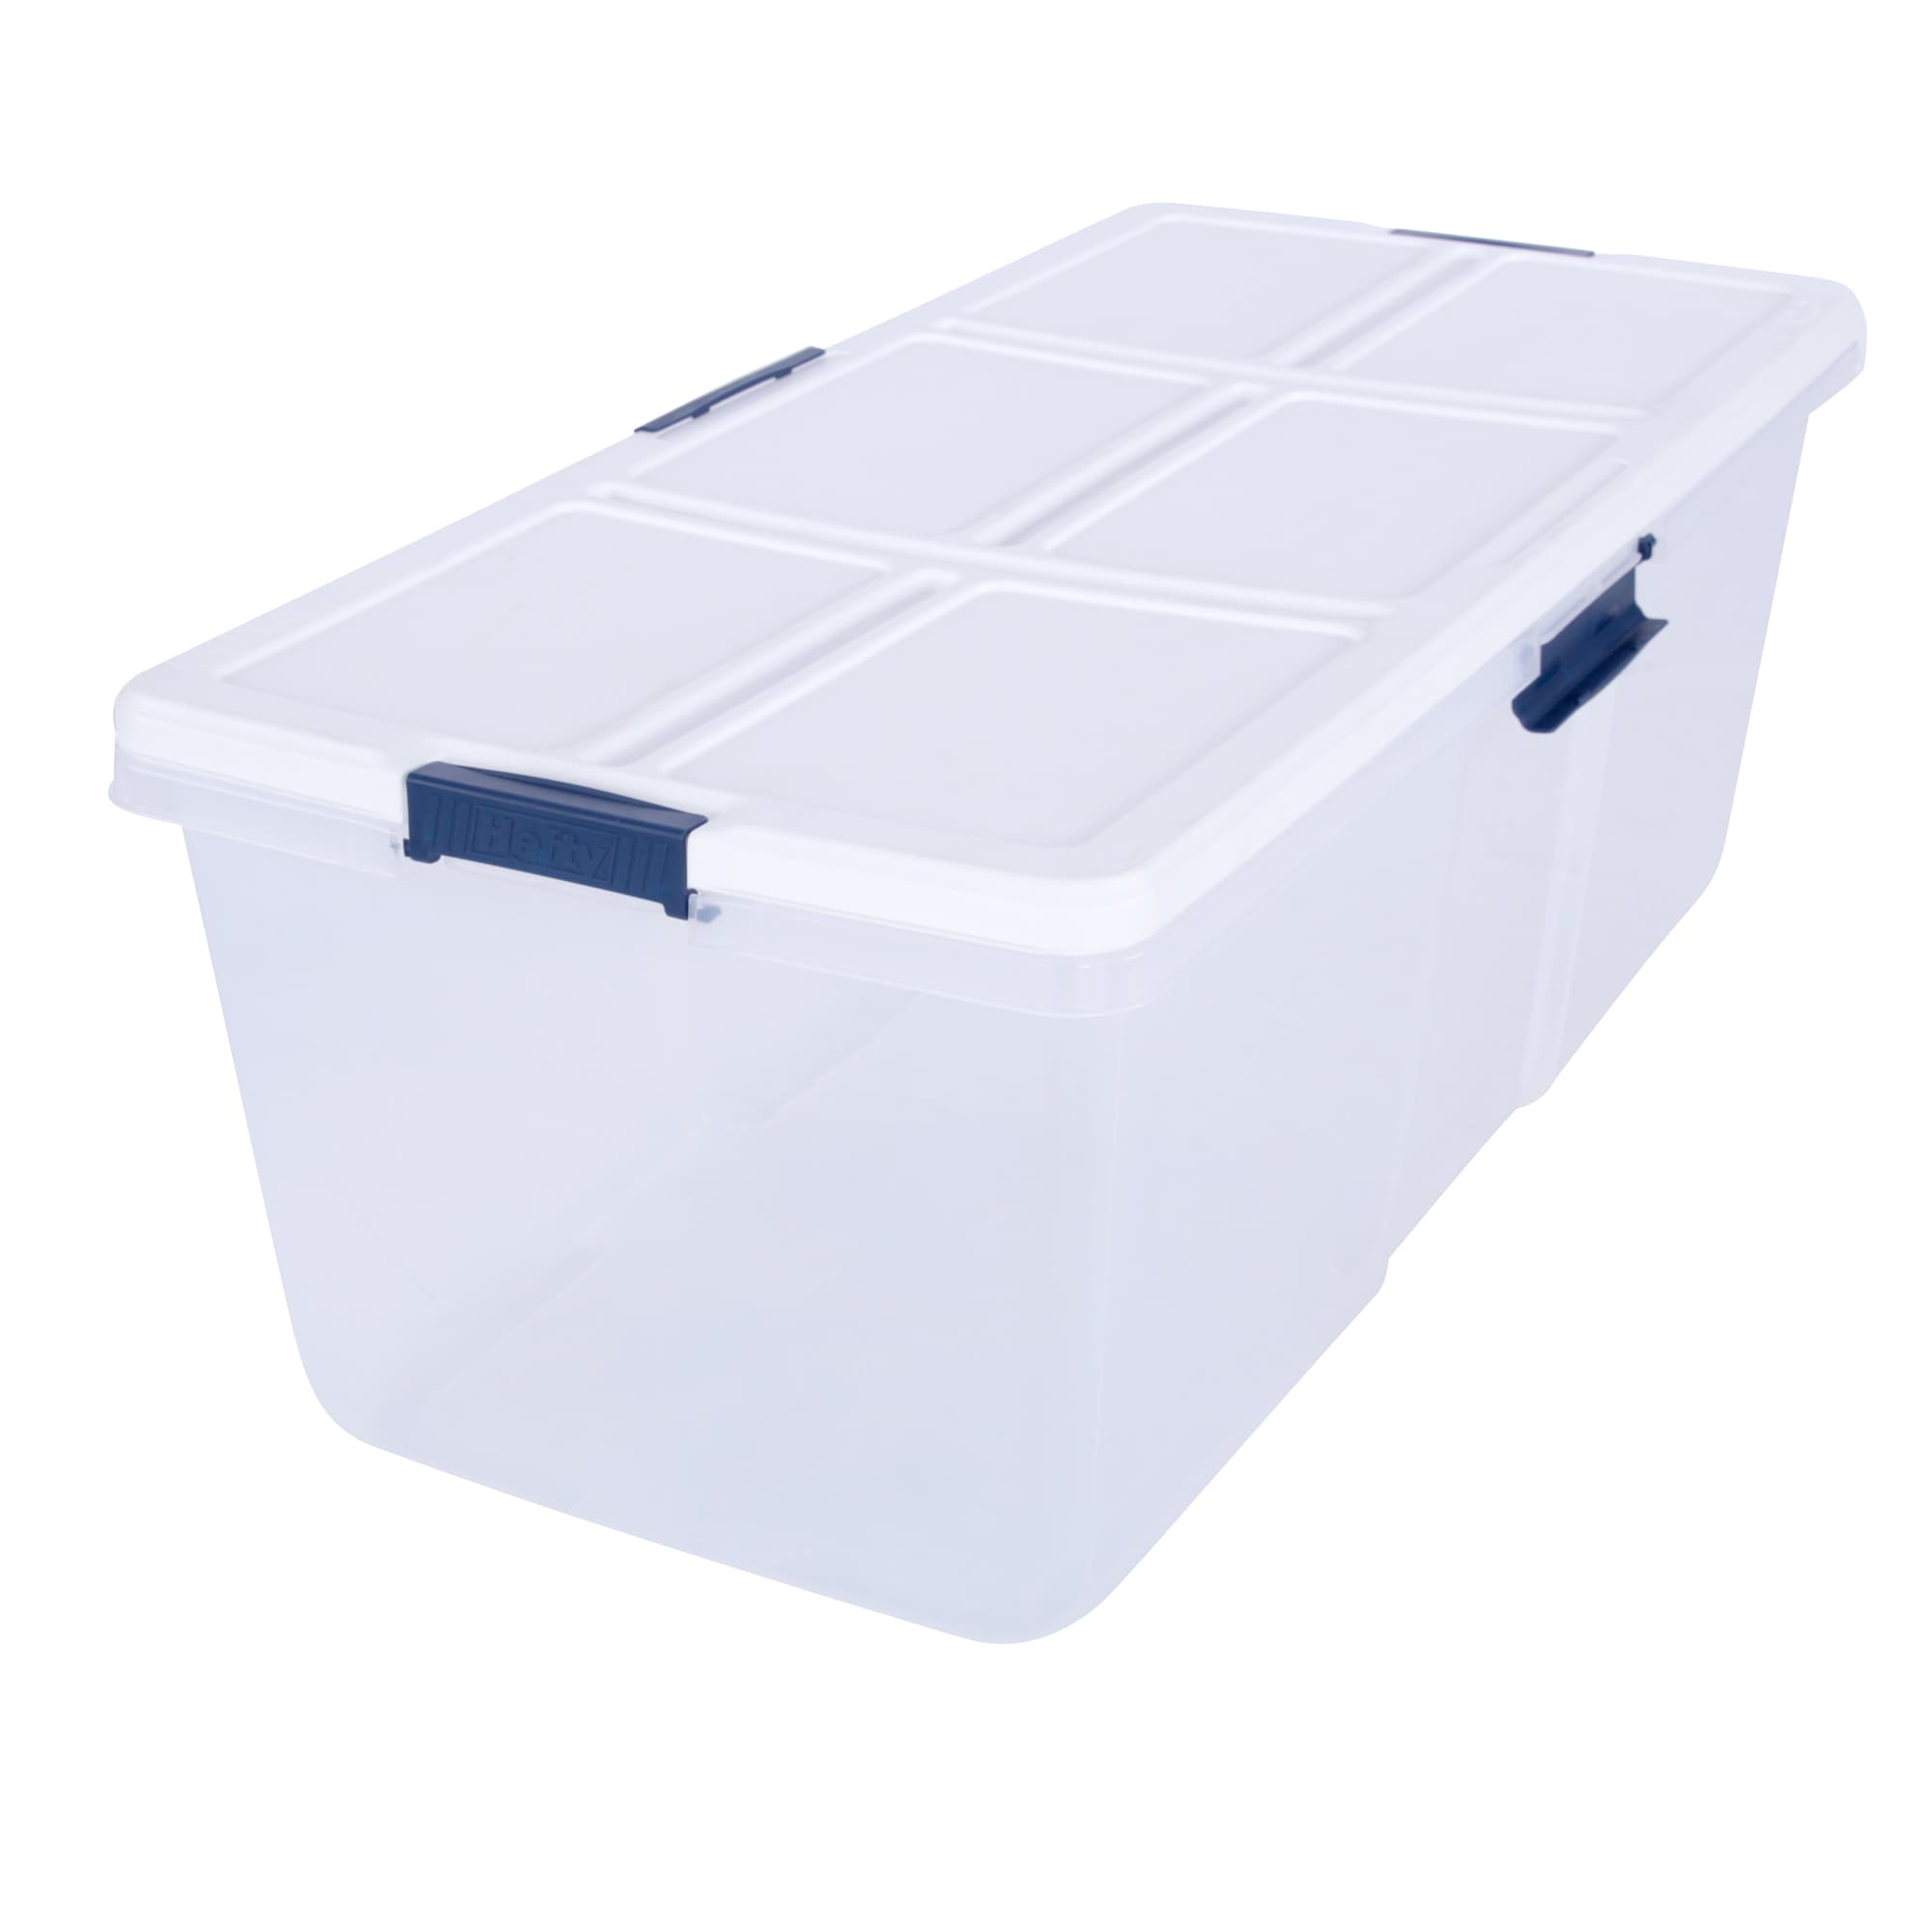 Large Latching Clear Storage Box - Brightroom™